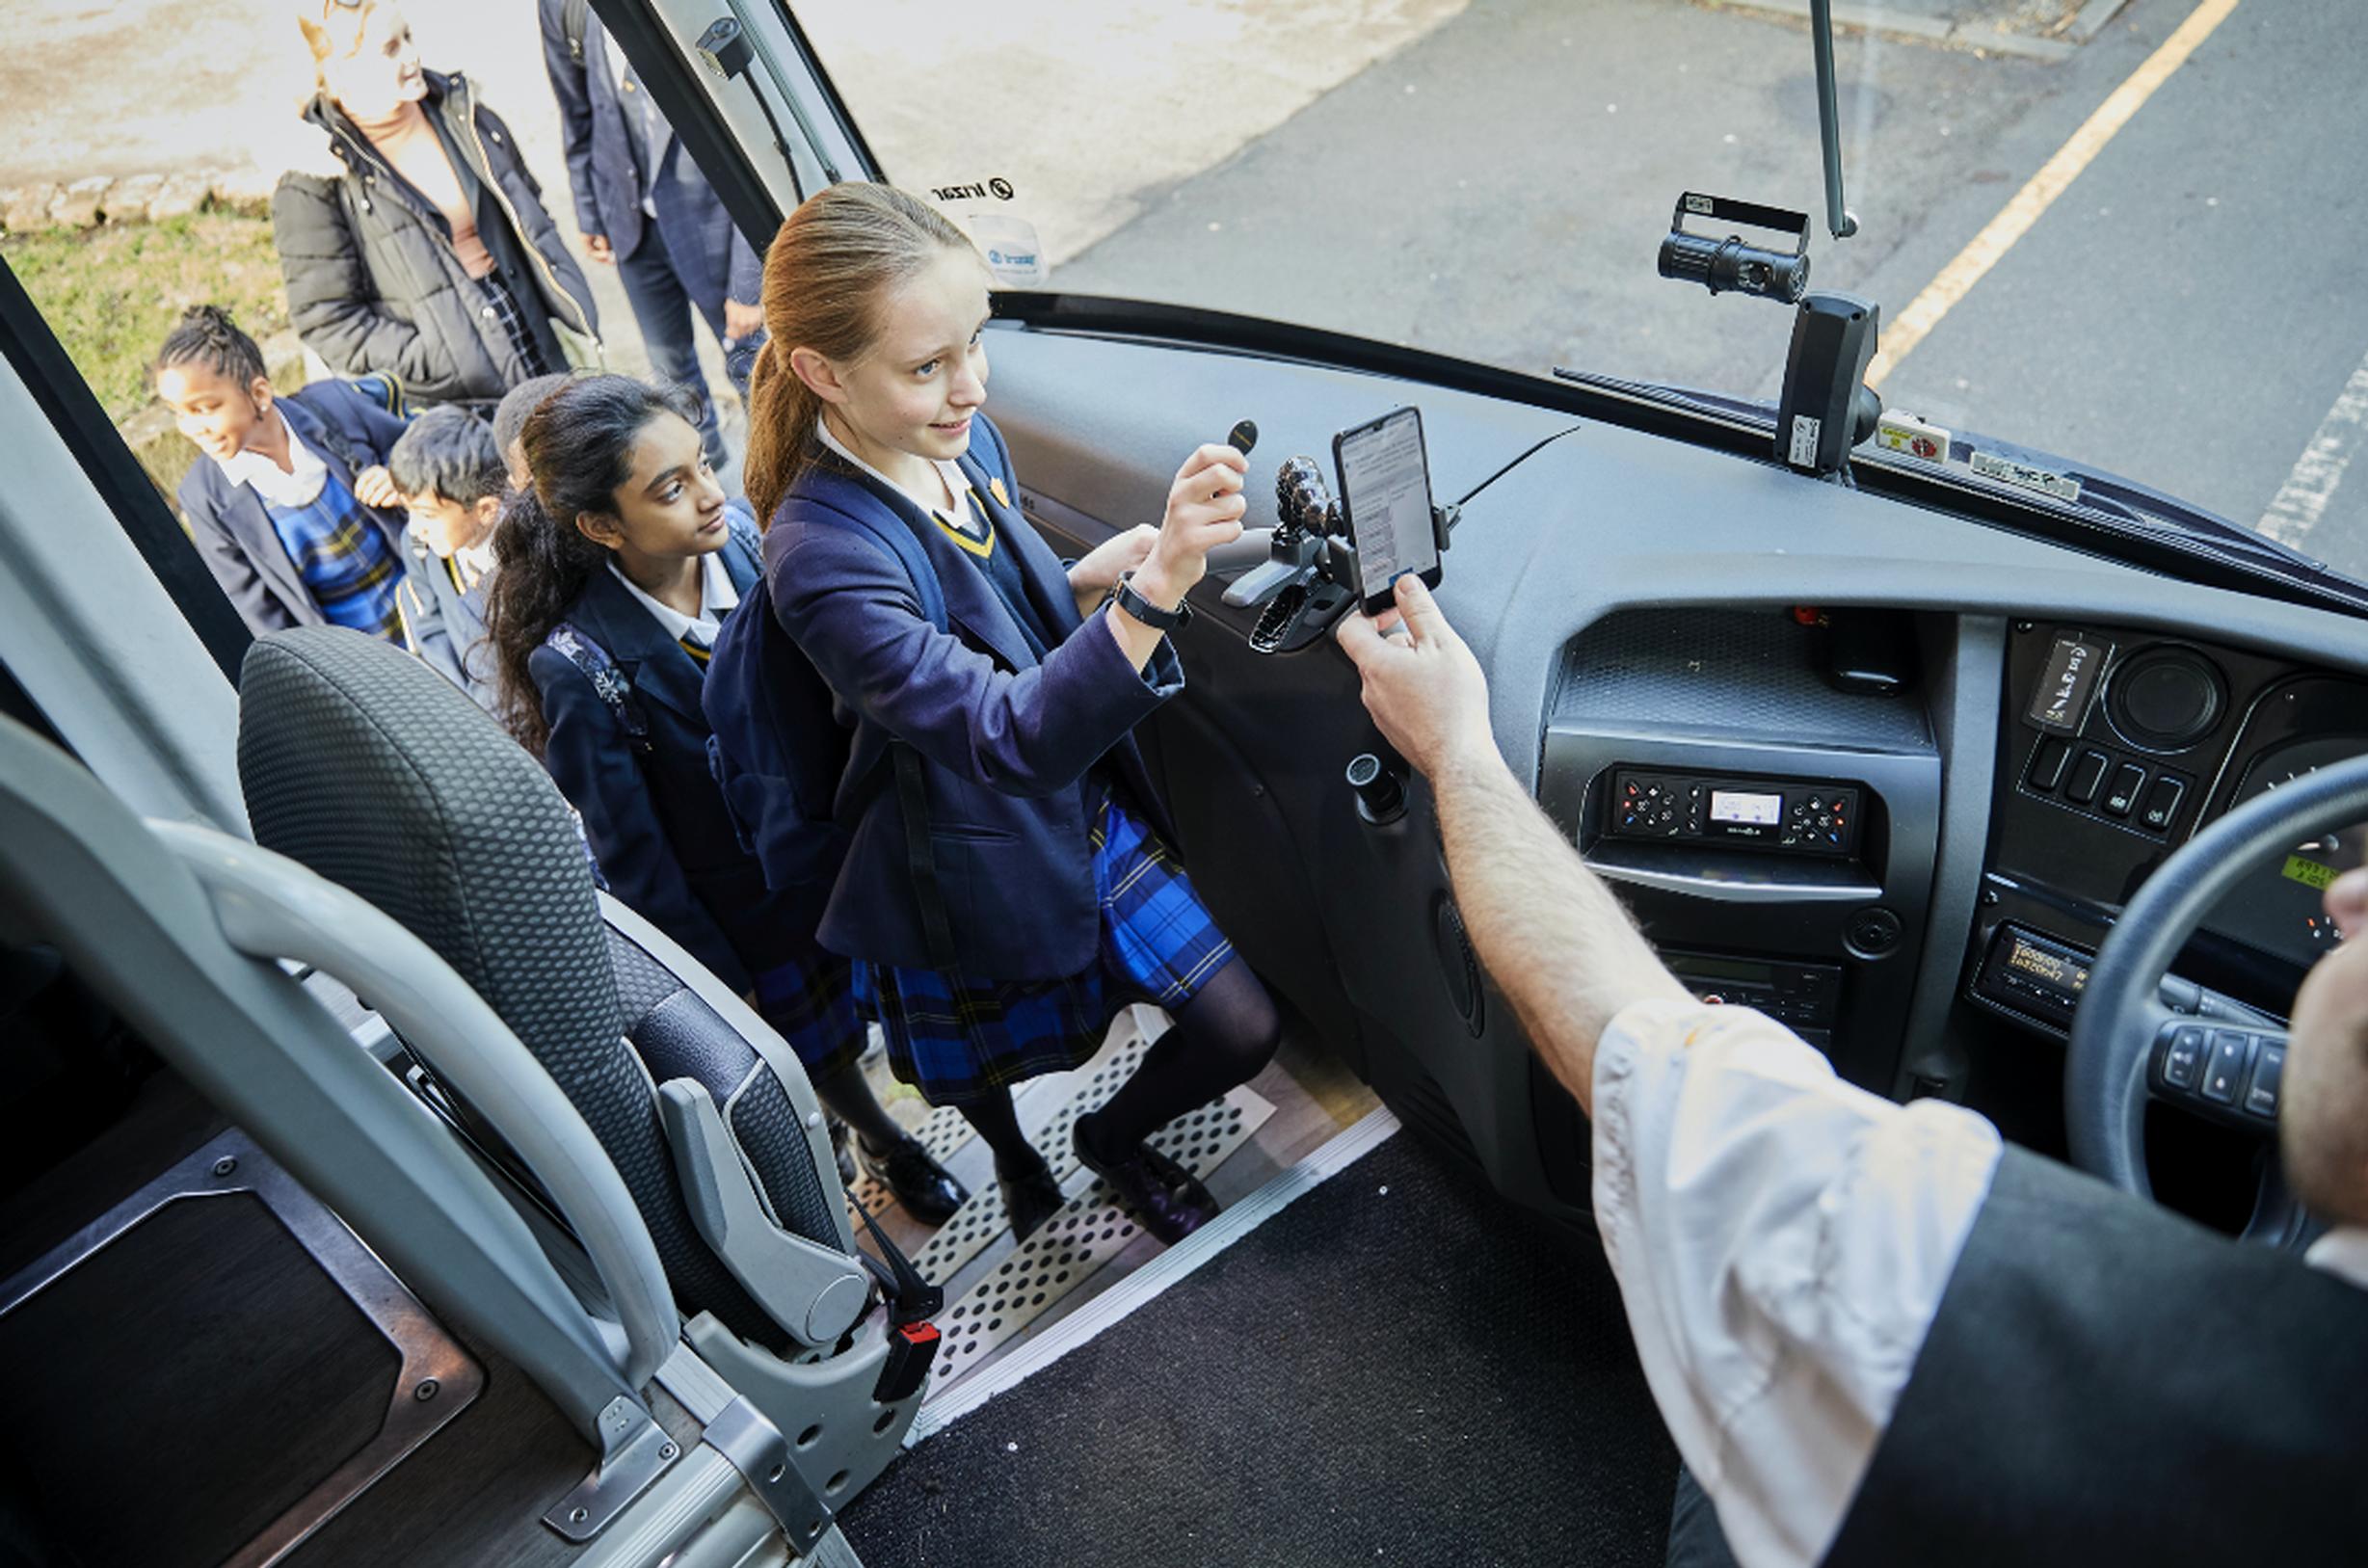 How can we solve the school run problem?